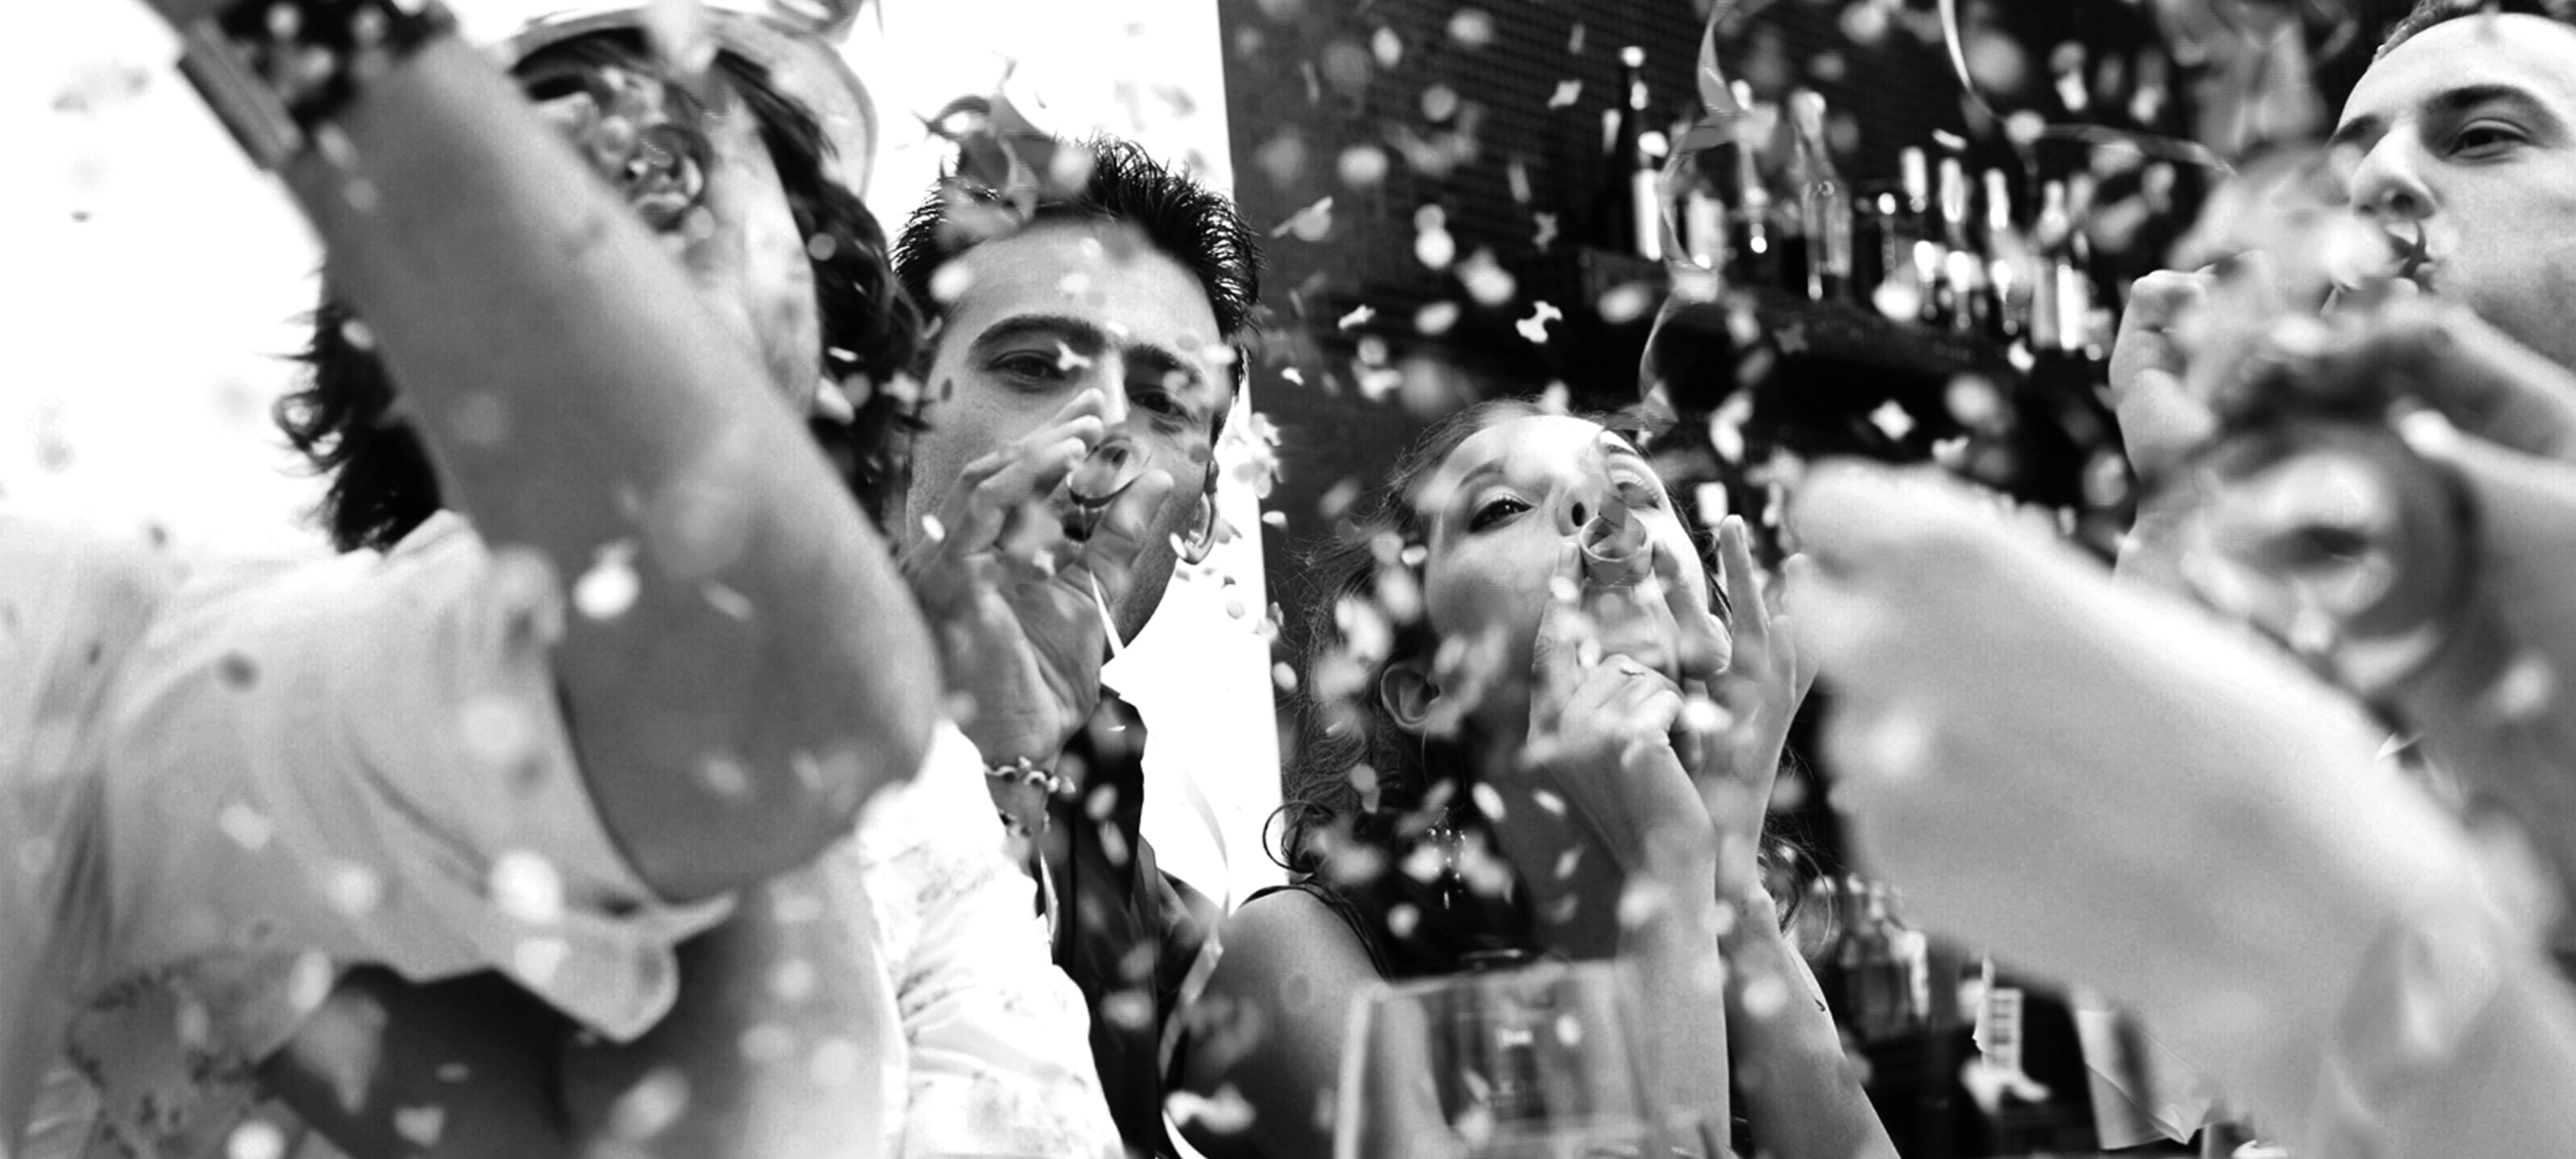 Bridal party blowing bubbles and celebrating at a wedding